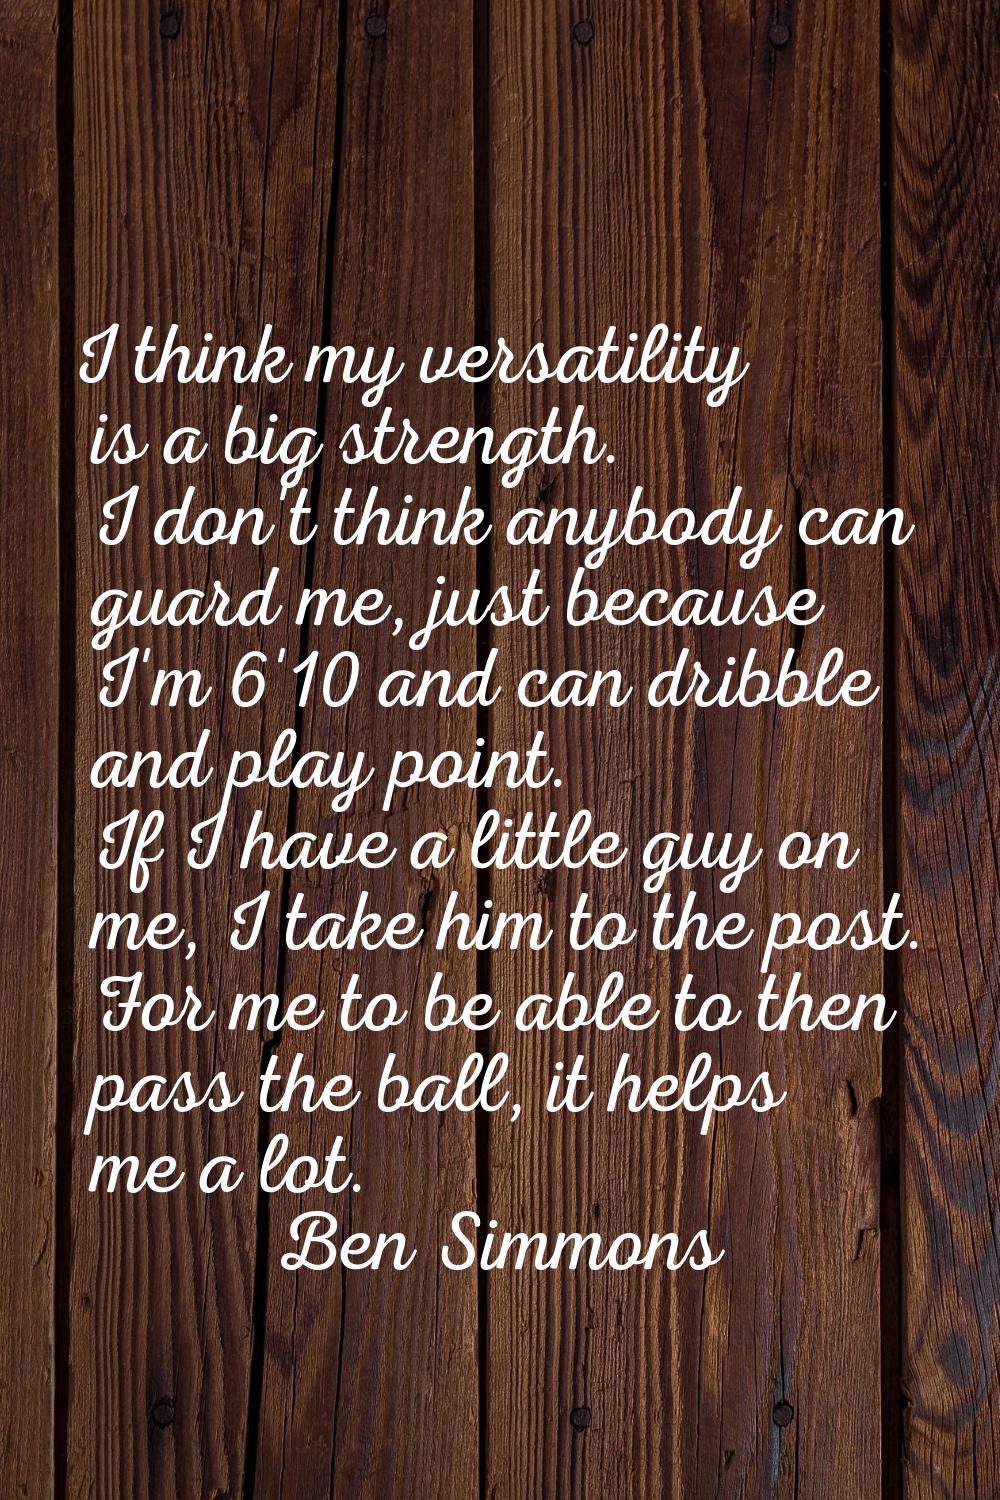 I think my versatility is a big strength. I don't think anybody can guard me, just because I'm 6'10